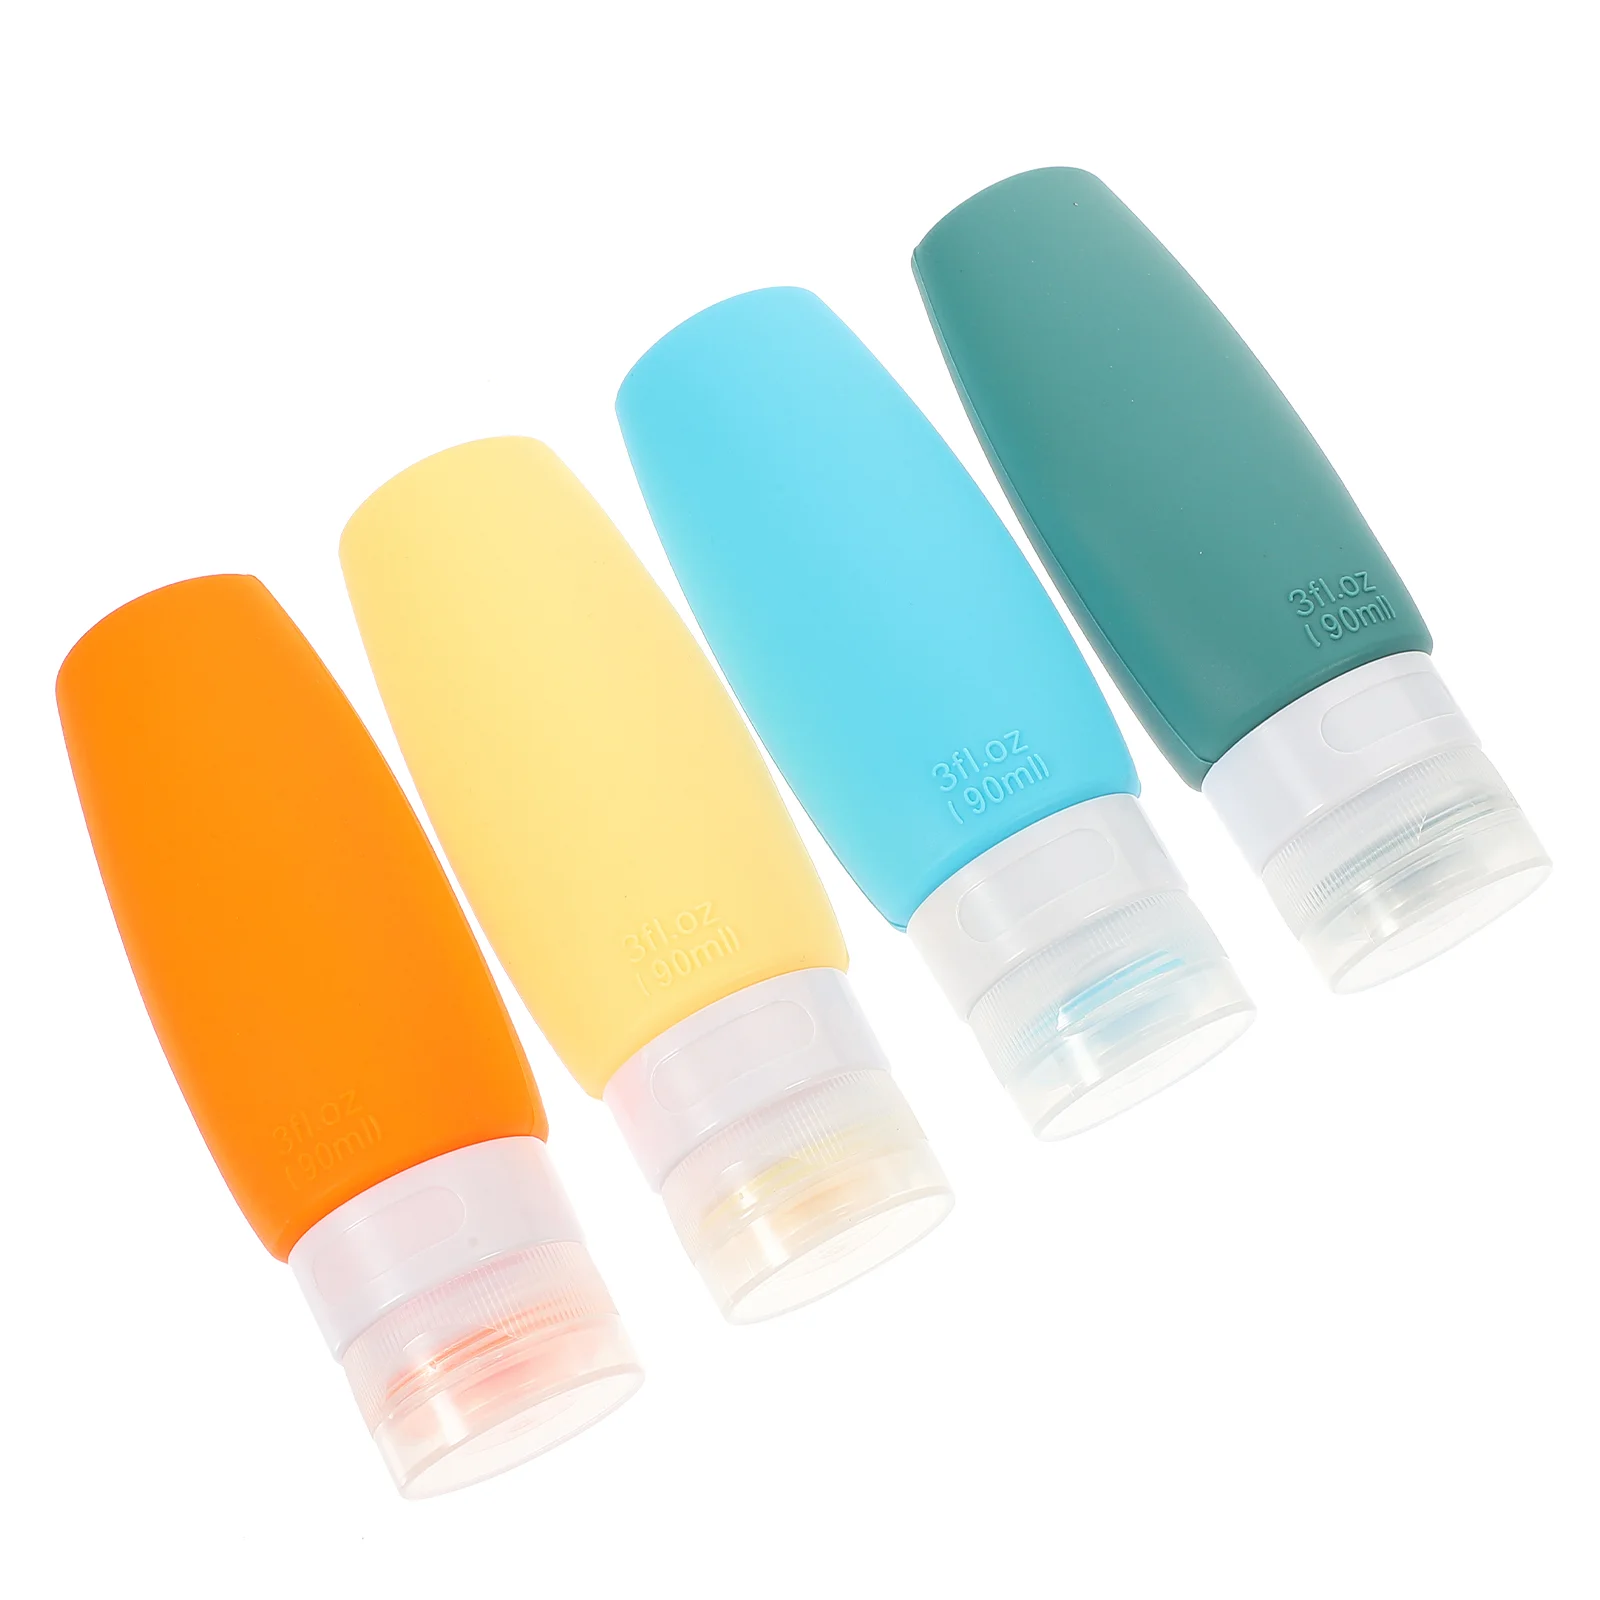 

4 Pcs Lotion Shampoo Bottles Travel Containers Toiletries Small Silica Gel Size Refillable